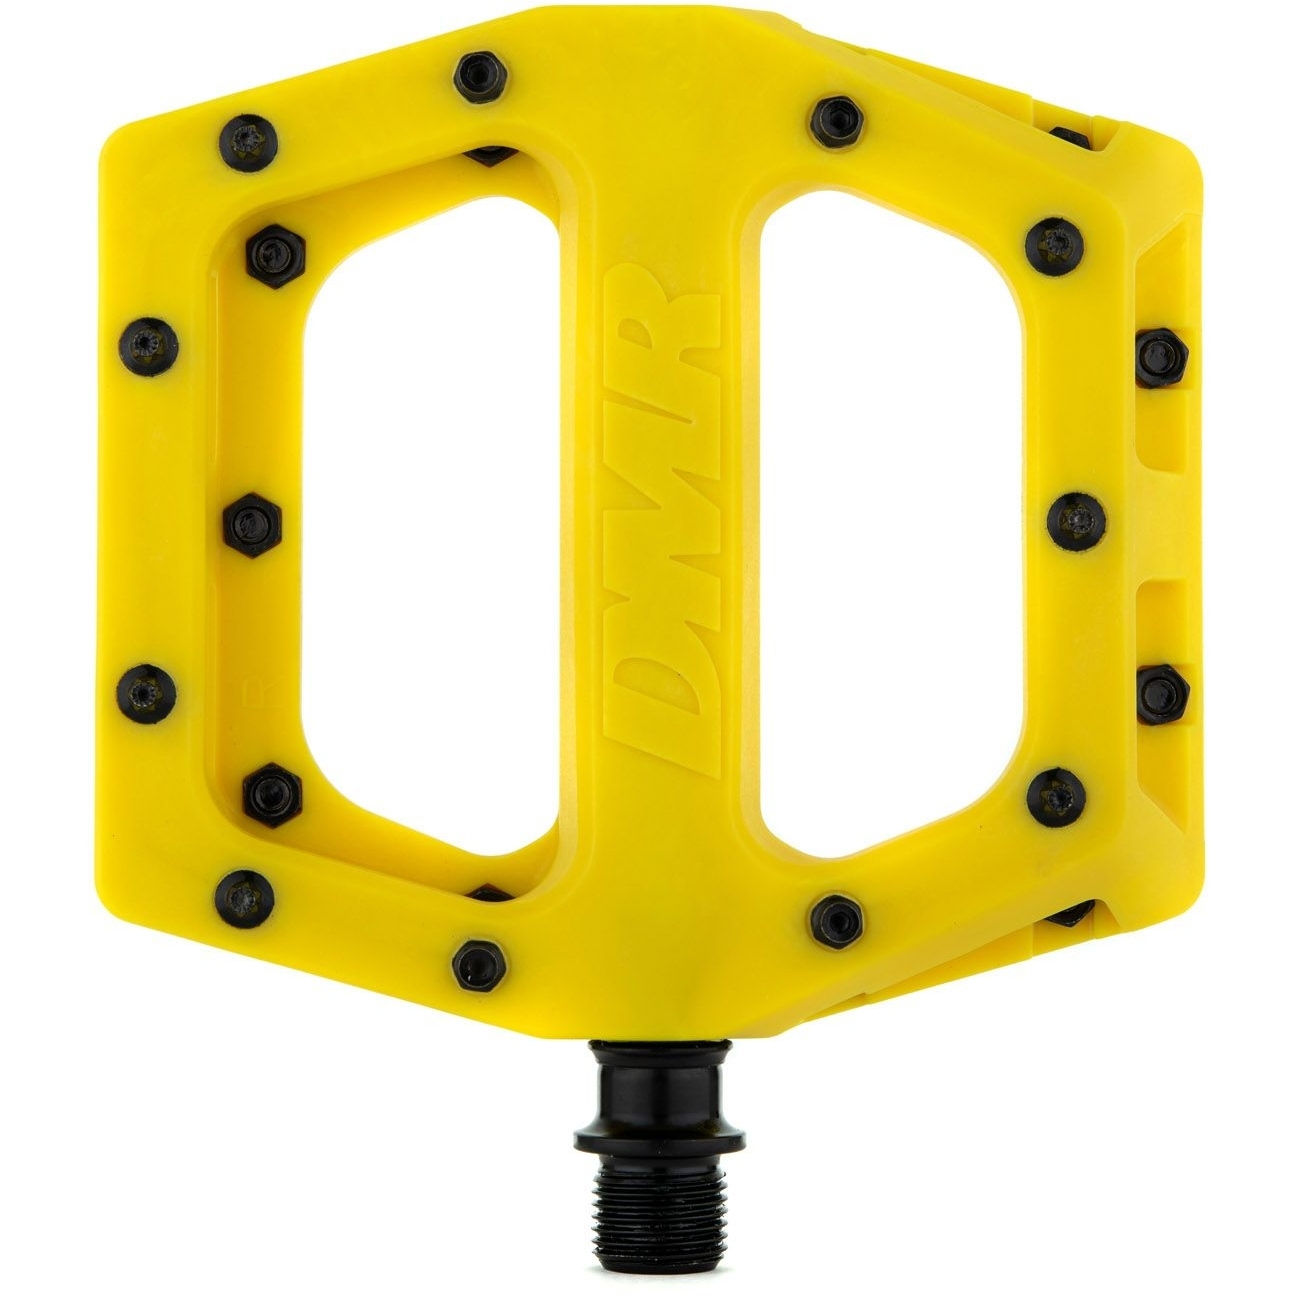 Picture of DMR V11 Flat Pedals - yellow